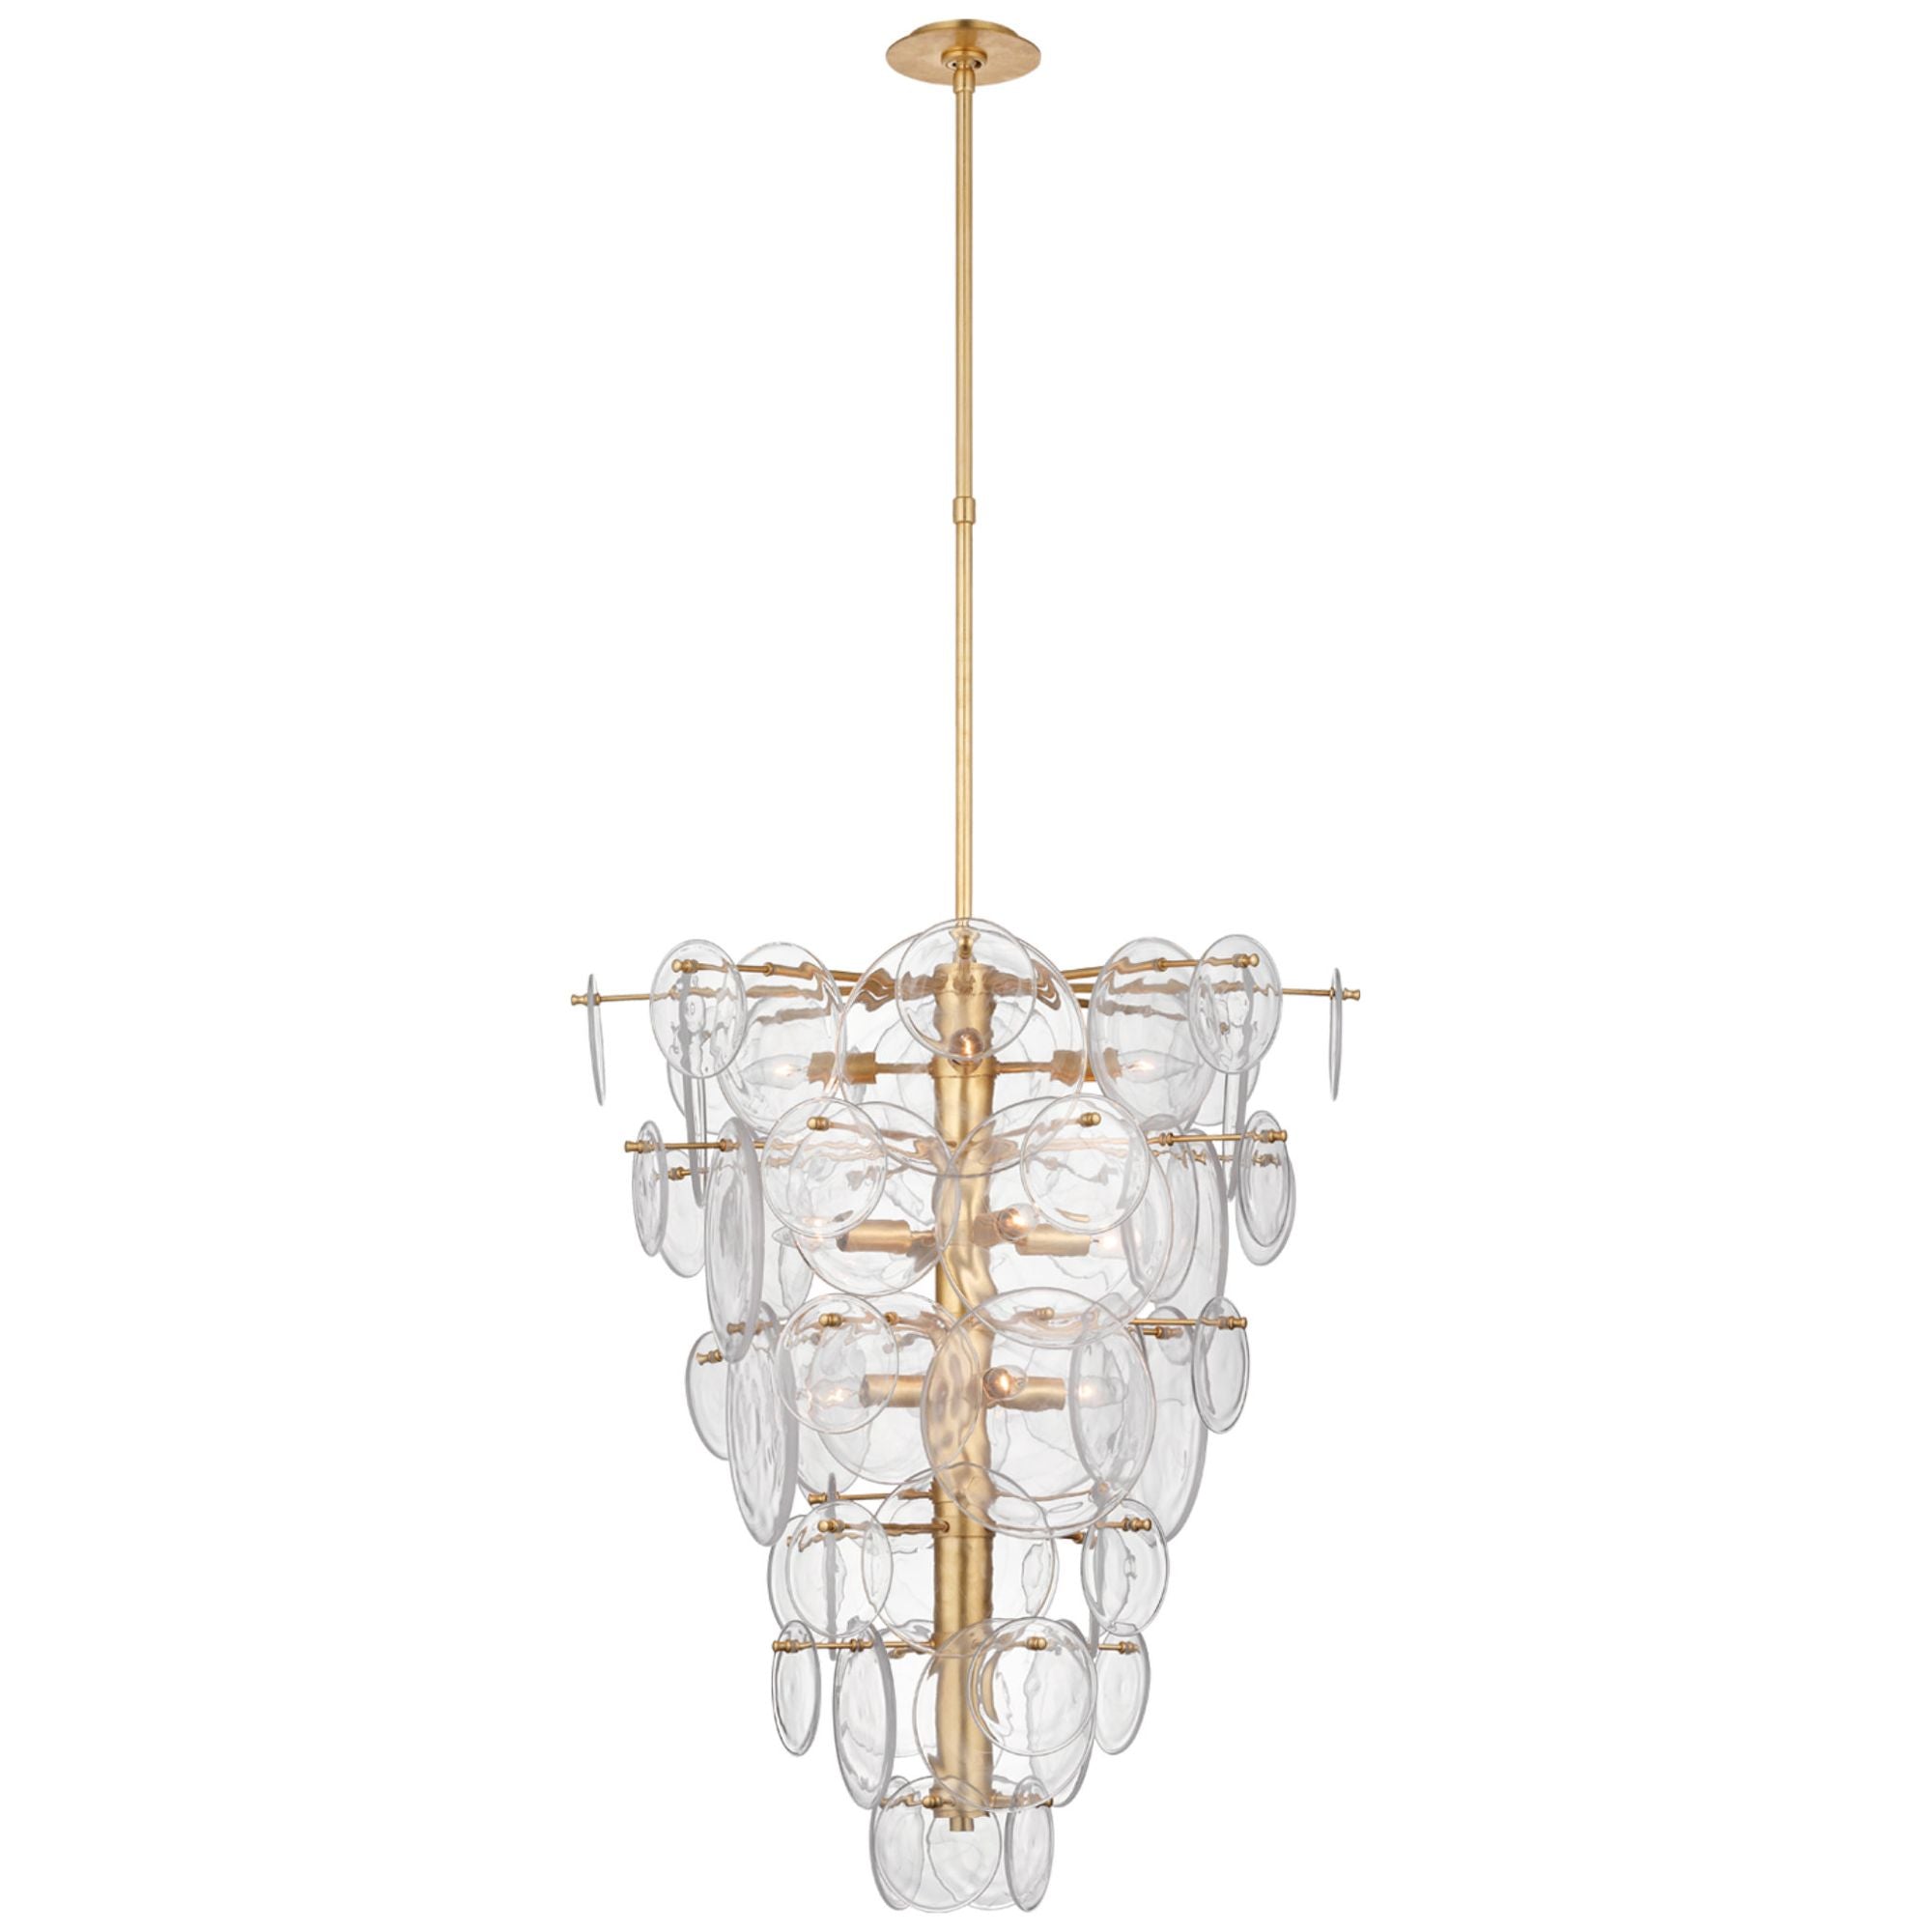 AERIN Loire Cascading Chandelier in Gild with Clear Strie Glass